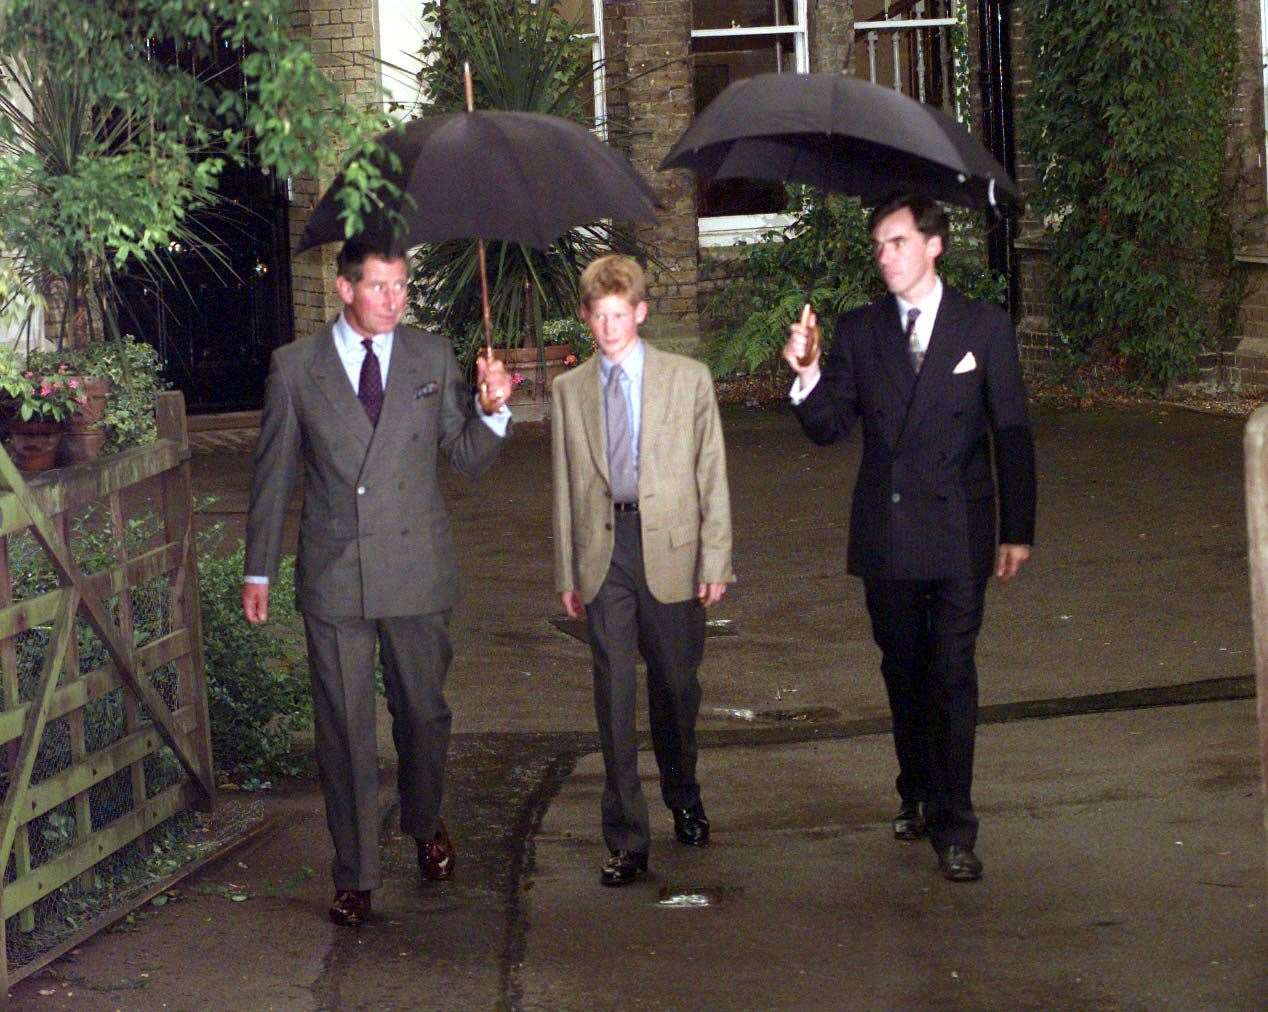 Harry (now the Duke of Sussex) and the Prince of Wales (now King Charles III) at Eton College, Berkshire, on his first day joining the school as a boarder in 1998 (Stefan Rousseau/PA)